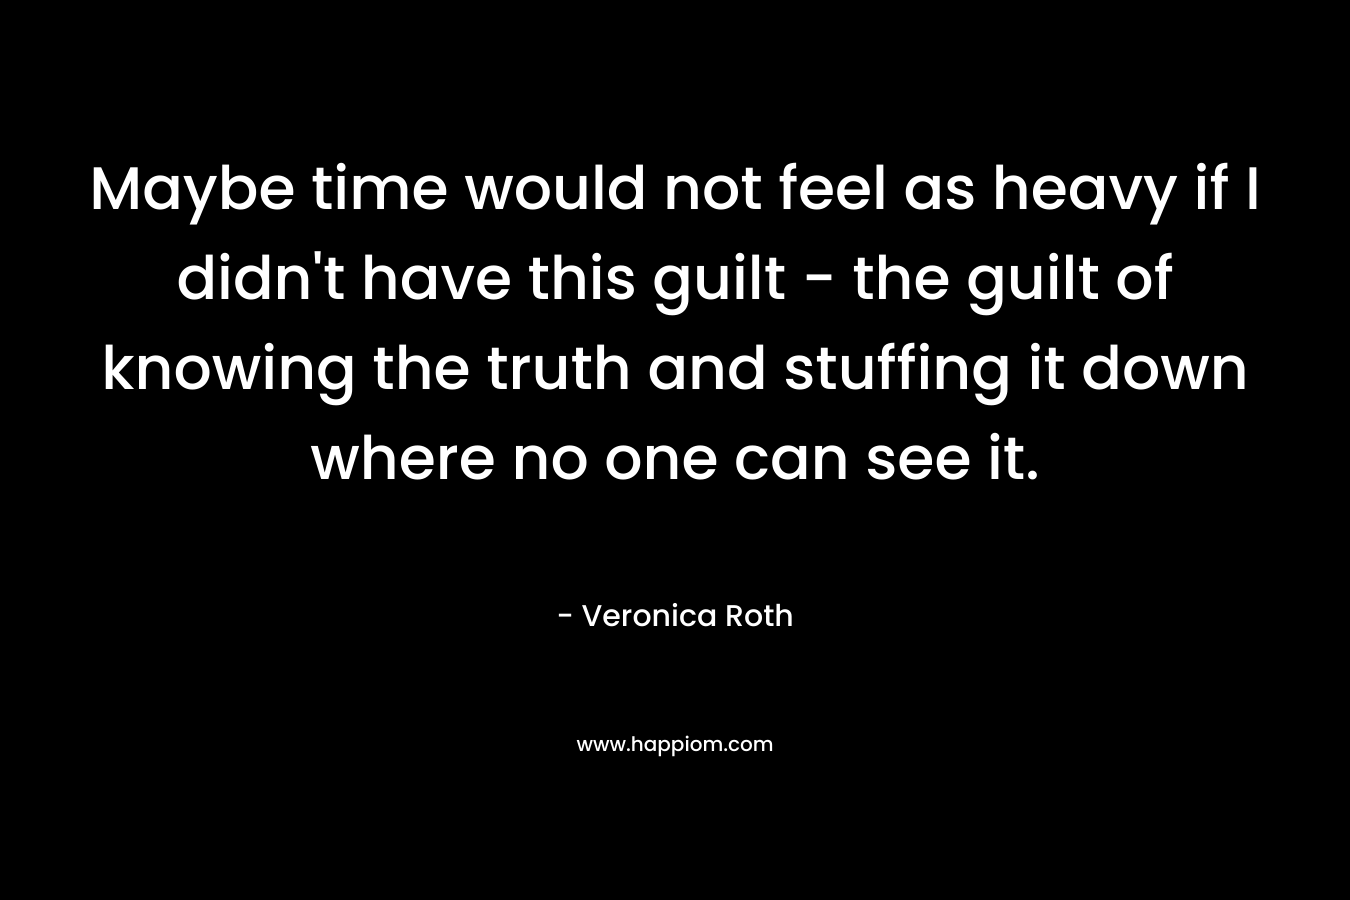 Maybe time would not feel as heavy if I didn't have this guilt - the guilt of knowing the truth and stuffing it down where no one can see it.